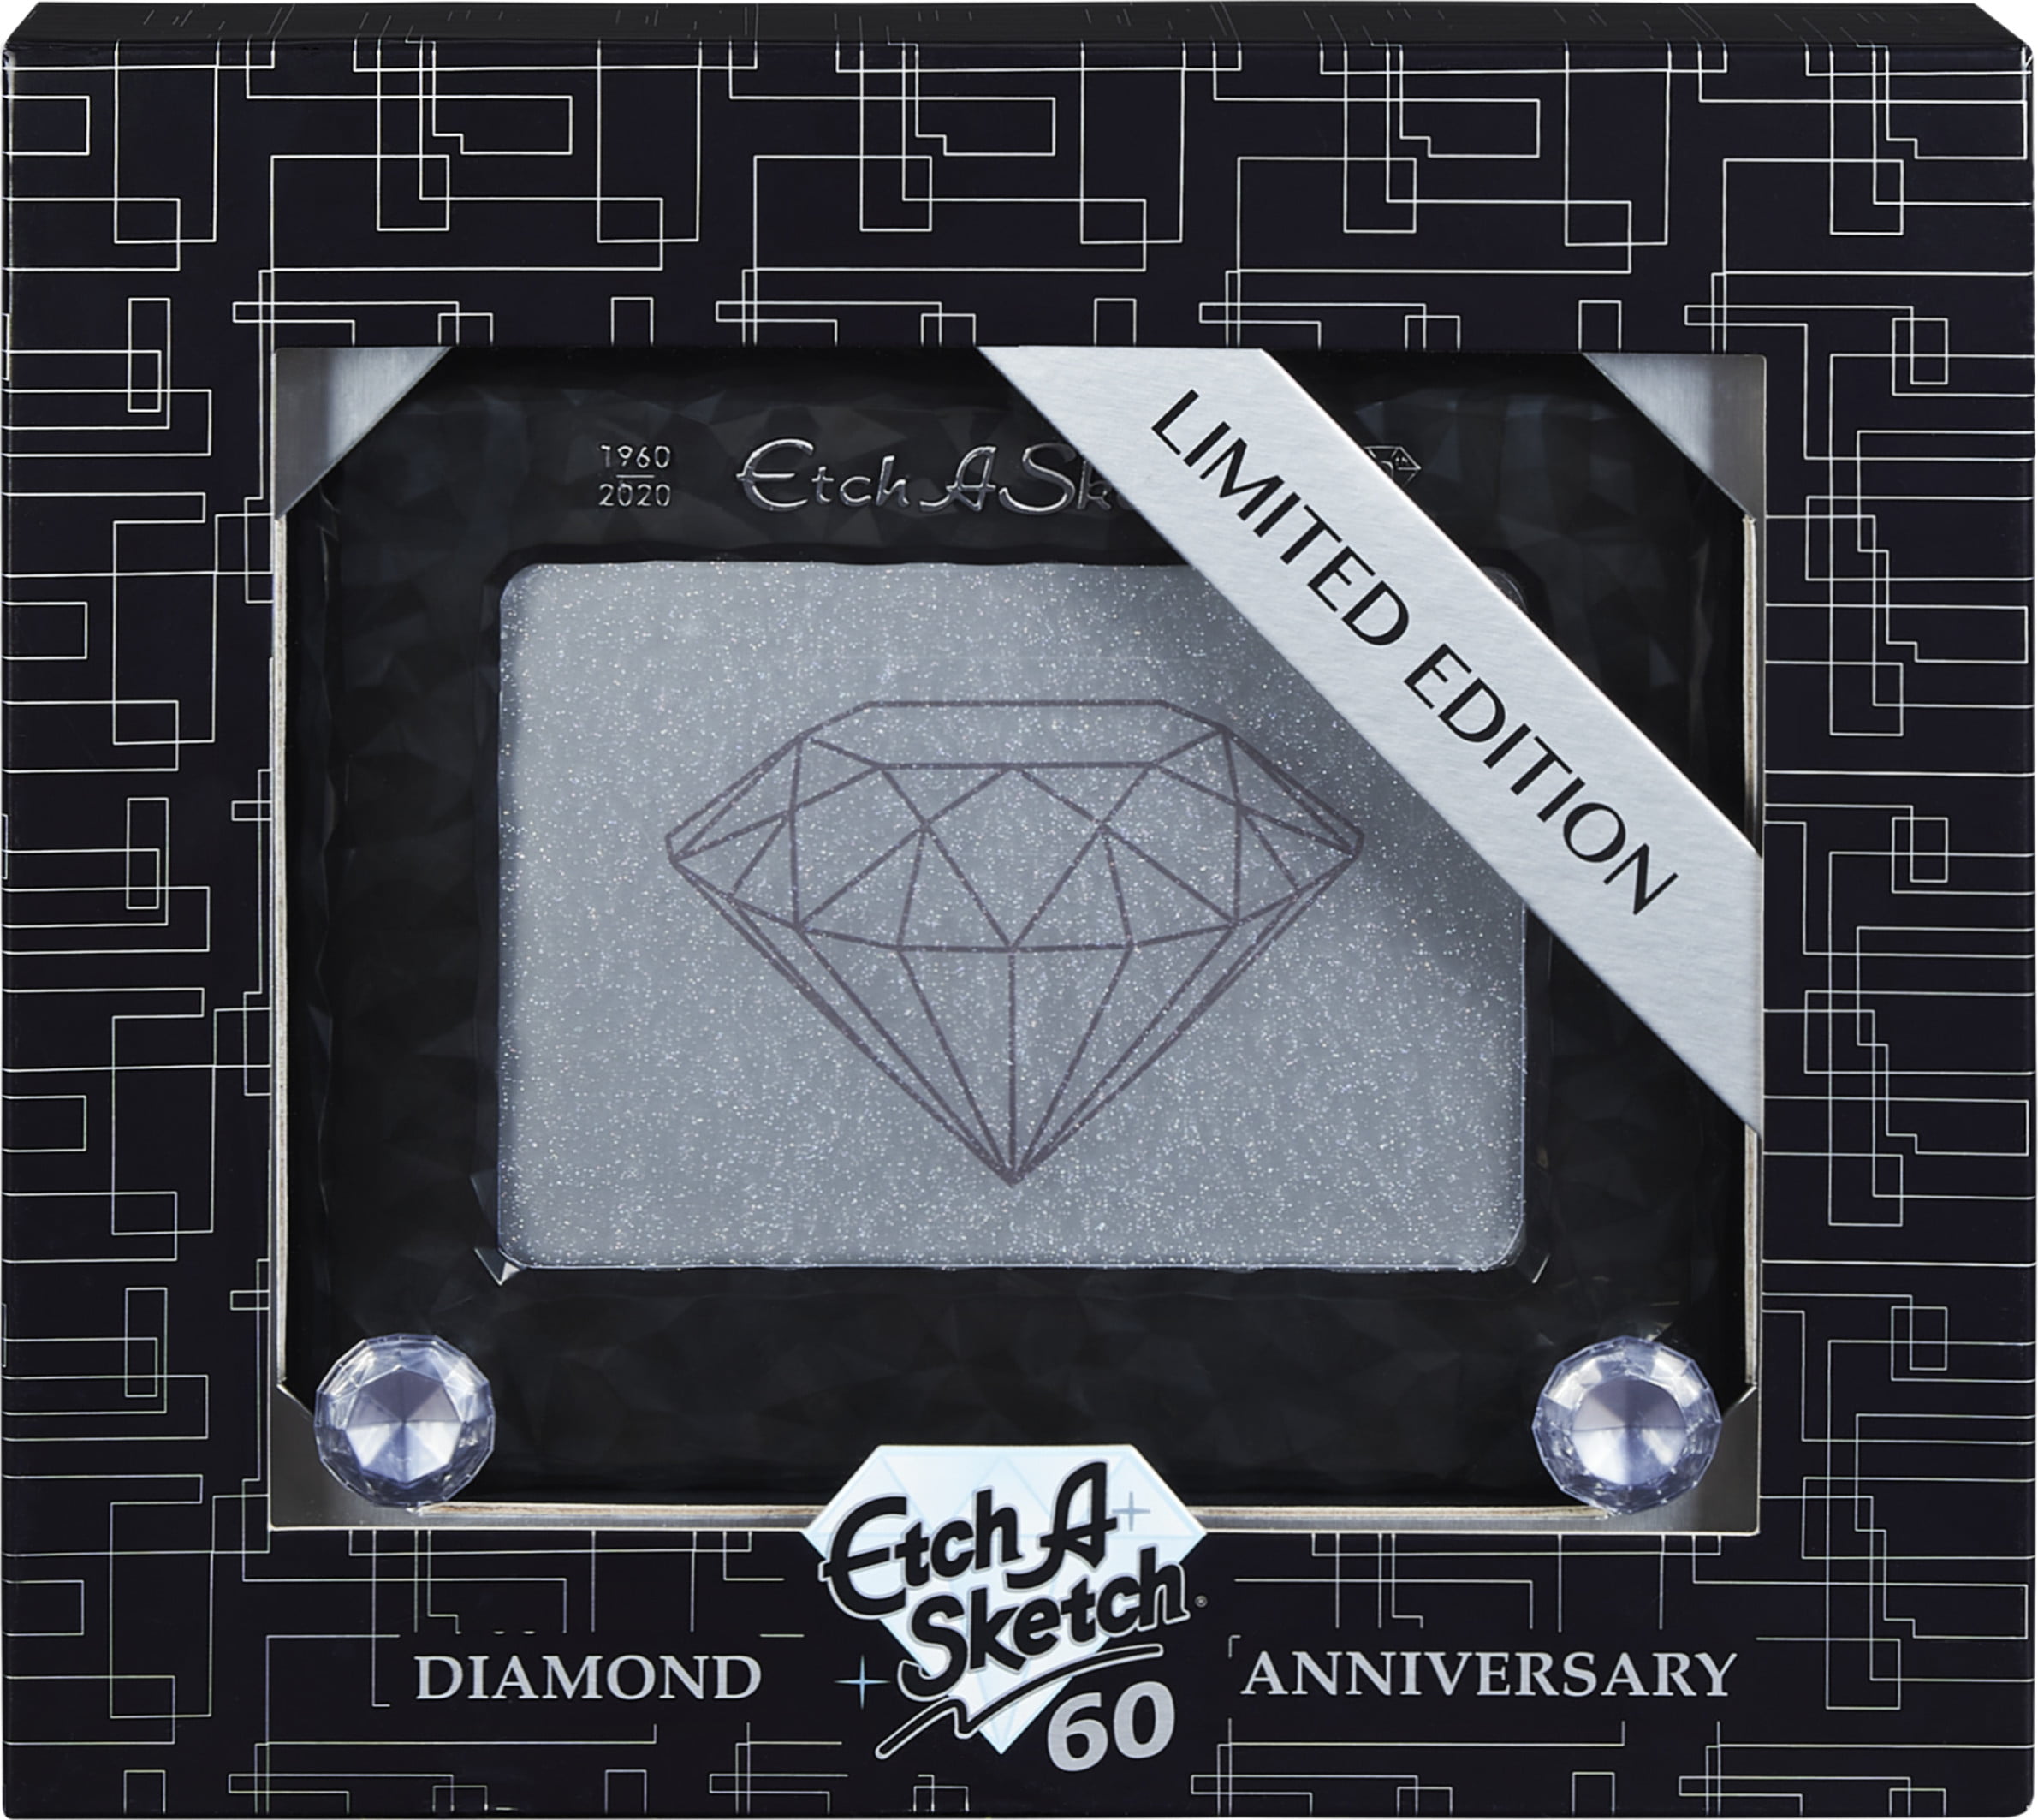 60th Anniversary Diamond Edition with Magic Screen Etch A Sketch Classic for Ages 3 and Up